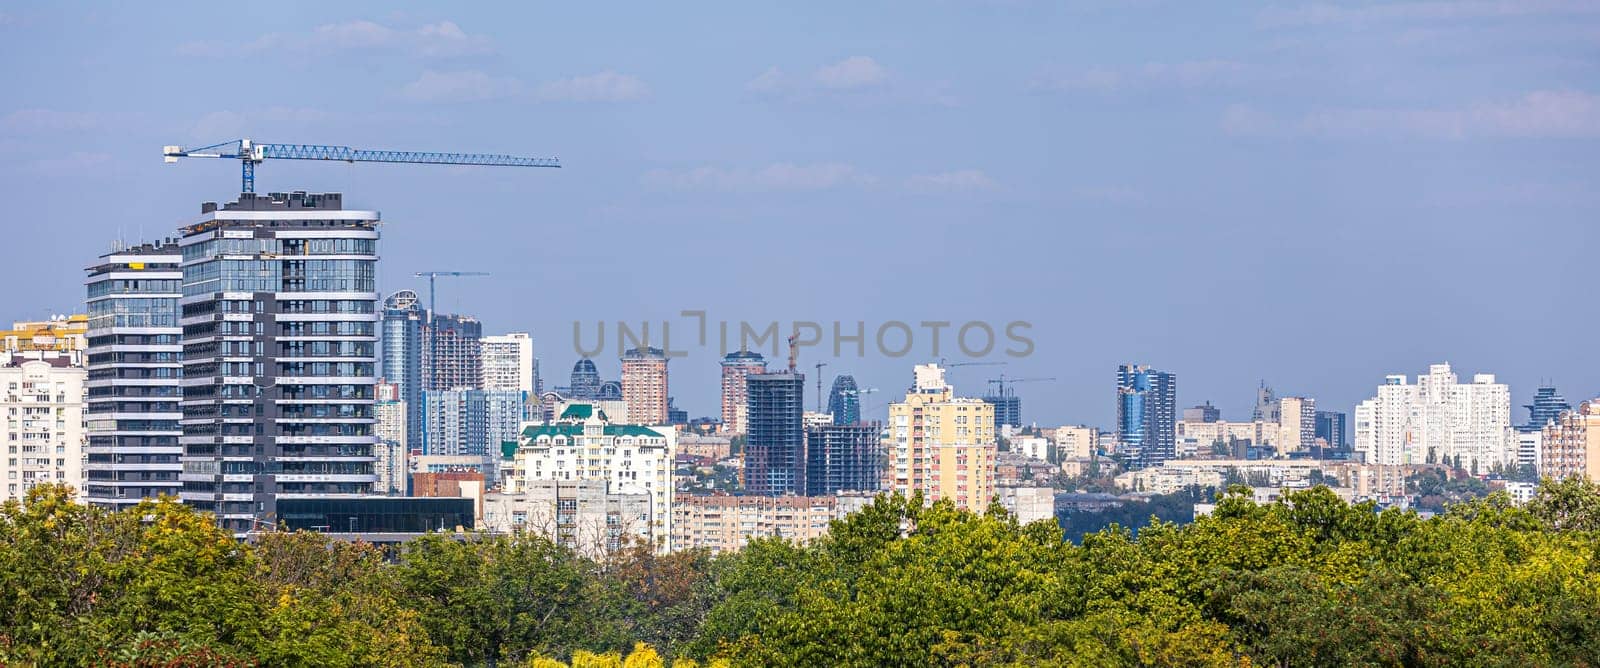 Aerial photography of residential areas of Kyiv with a view of the railway station and new skyscrapers under construction, aerial view, city photography. Copy space.